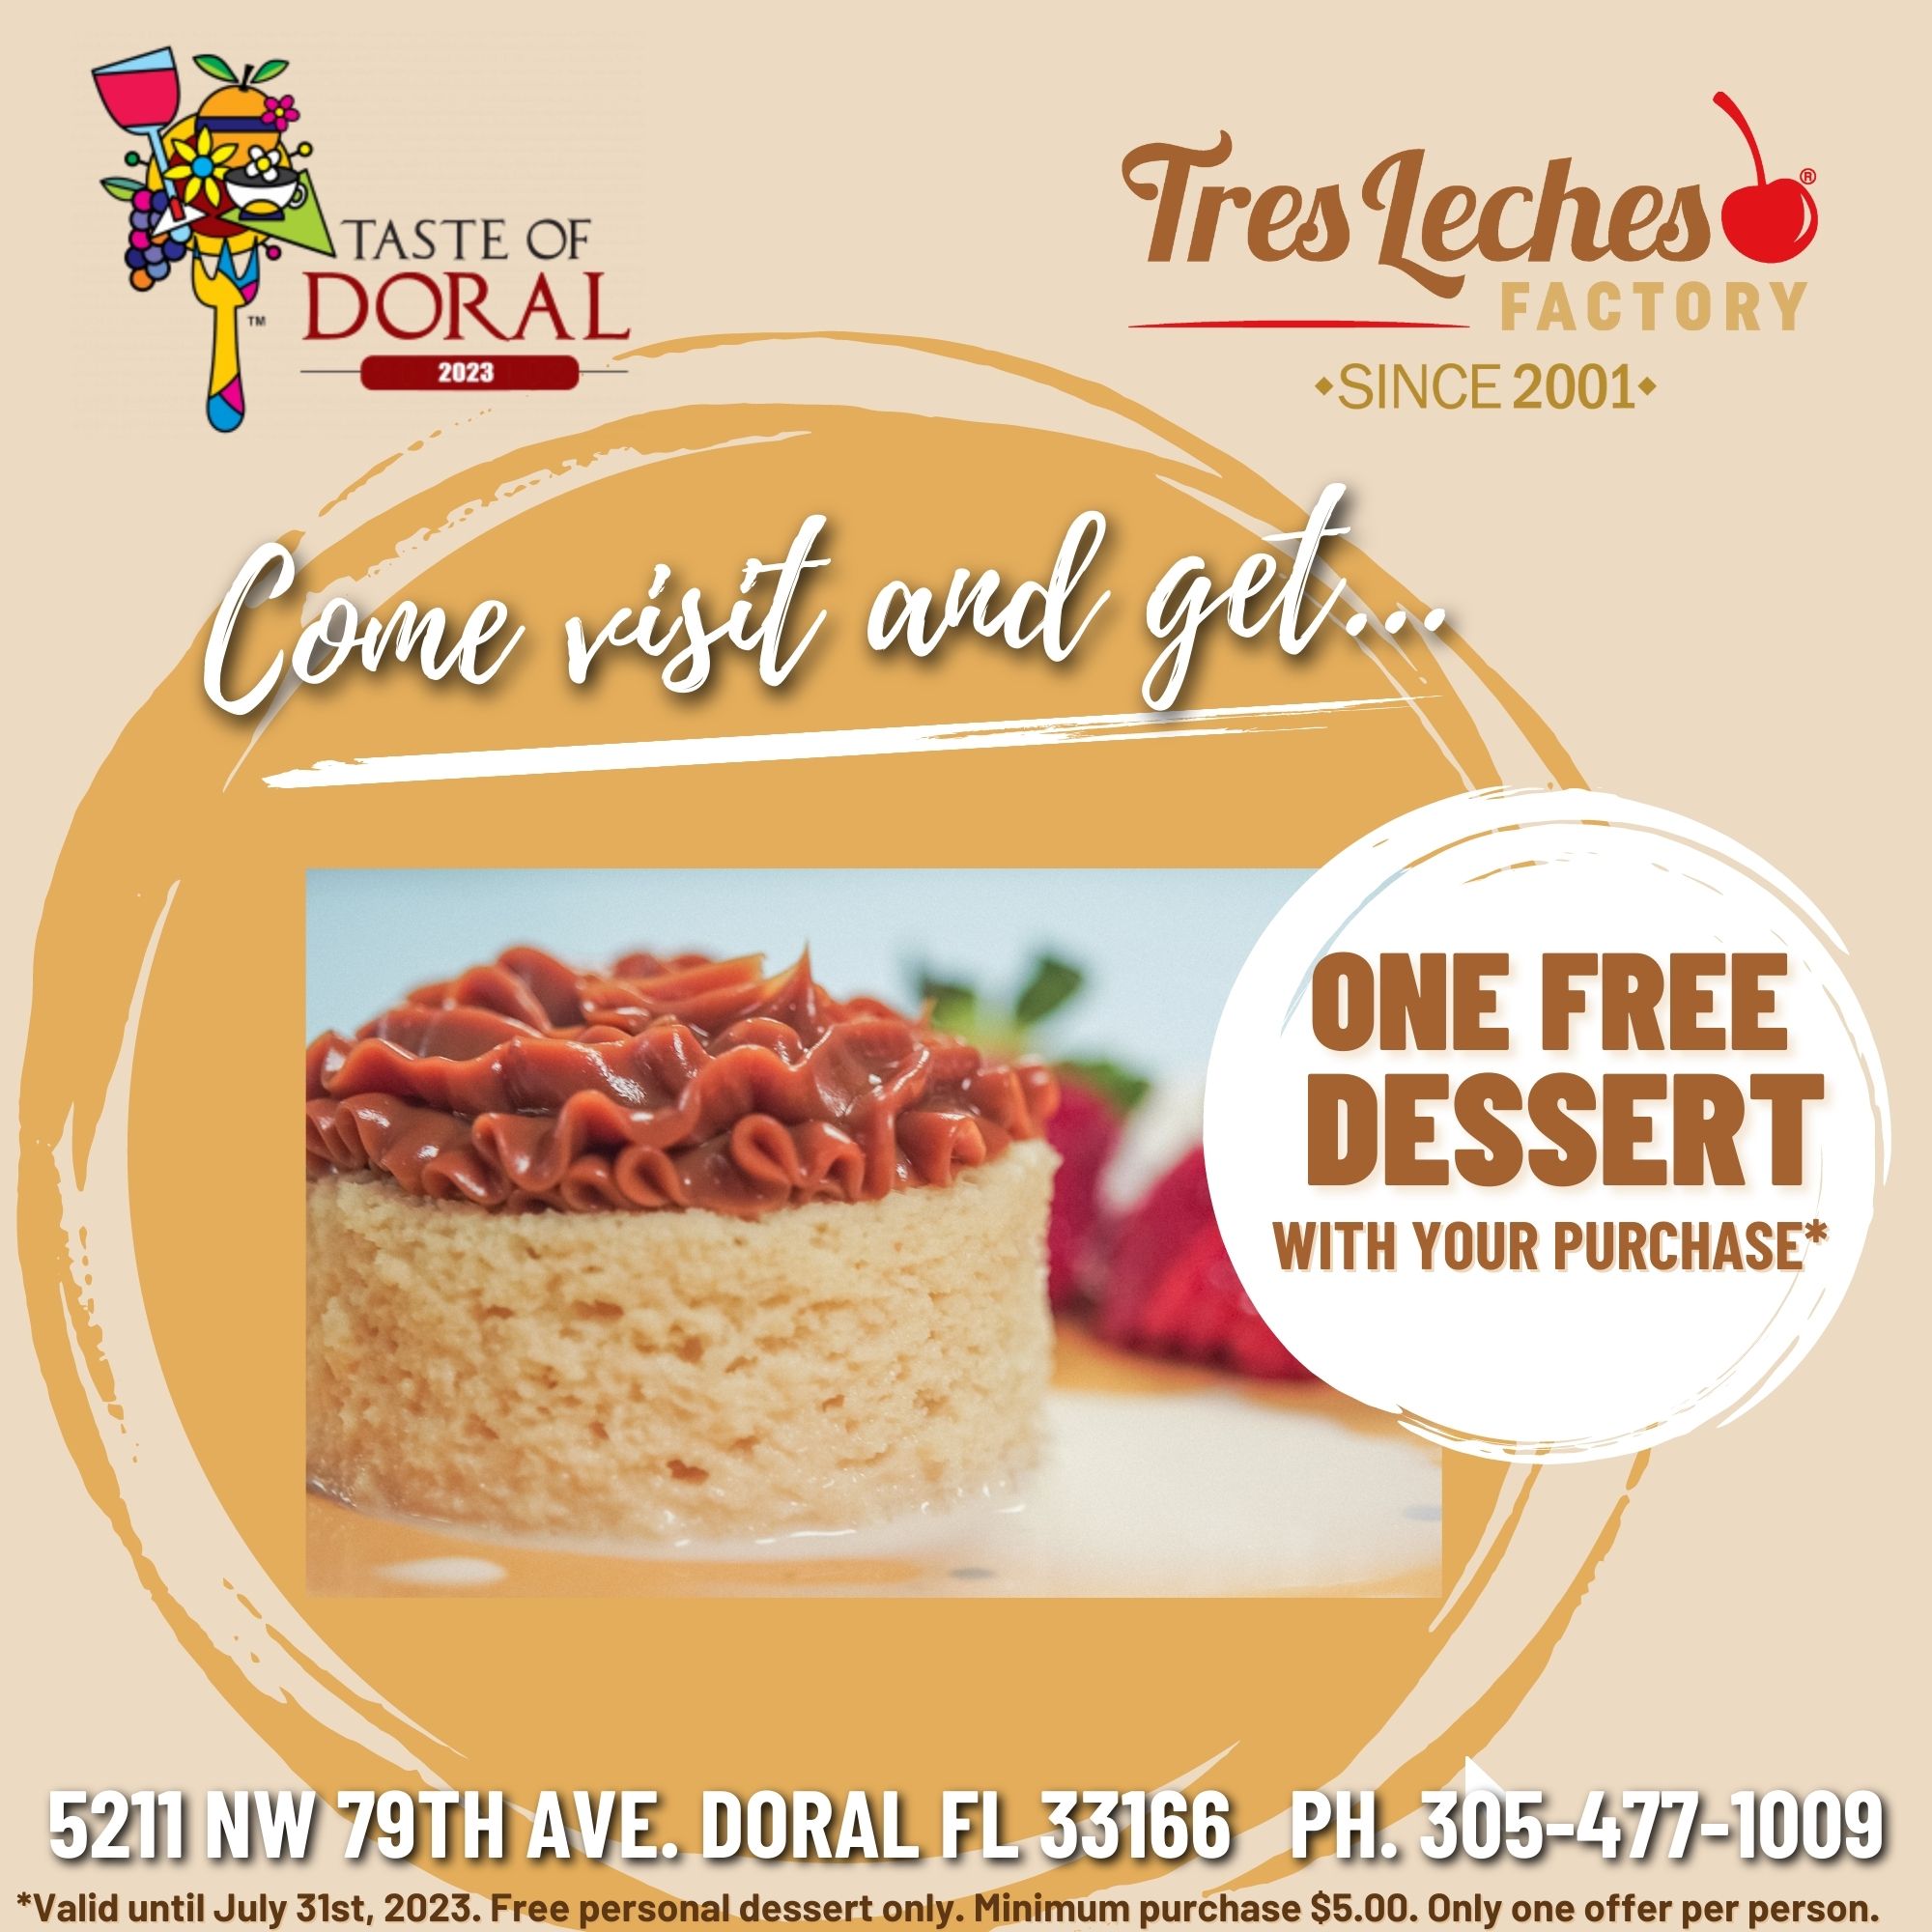 Tres Leches Factory gives you a FREE personal dessert ﻿ with your purchase until 7/31/23